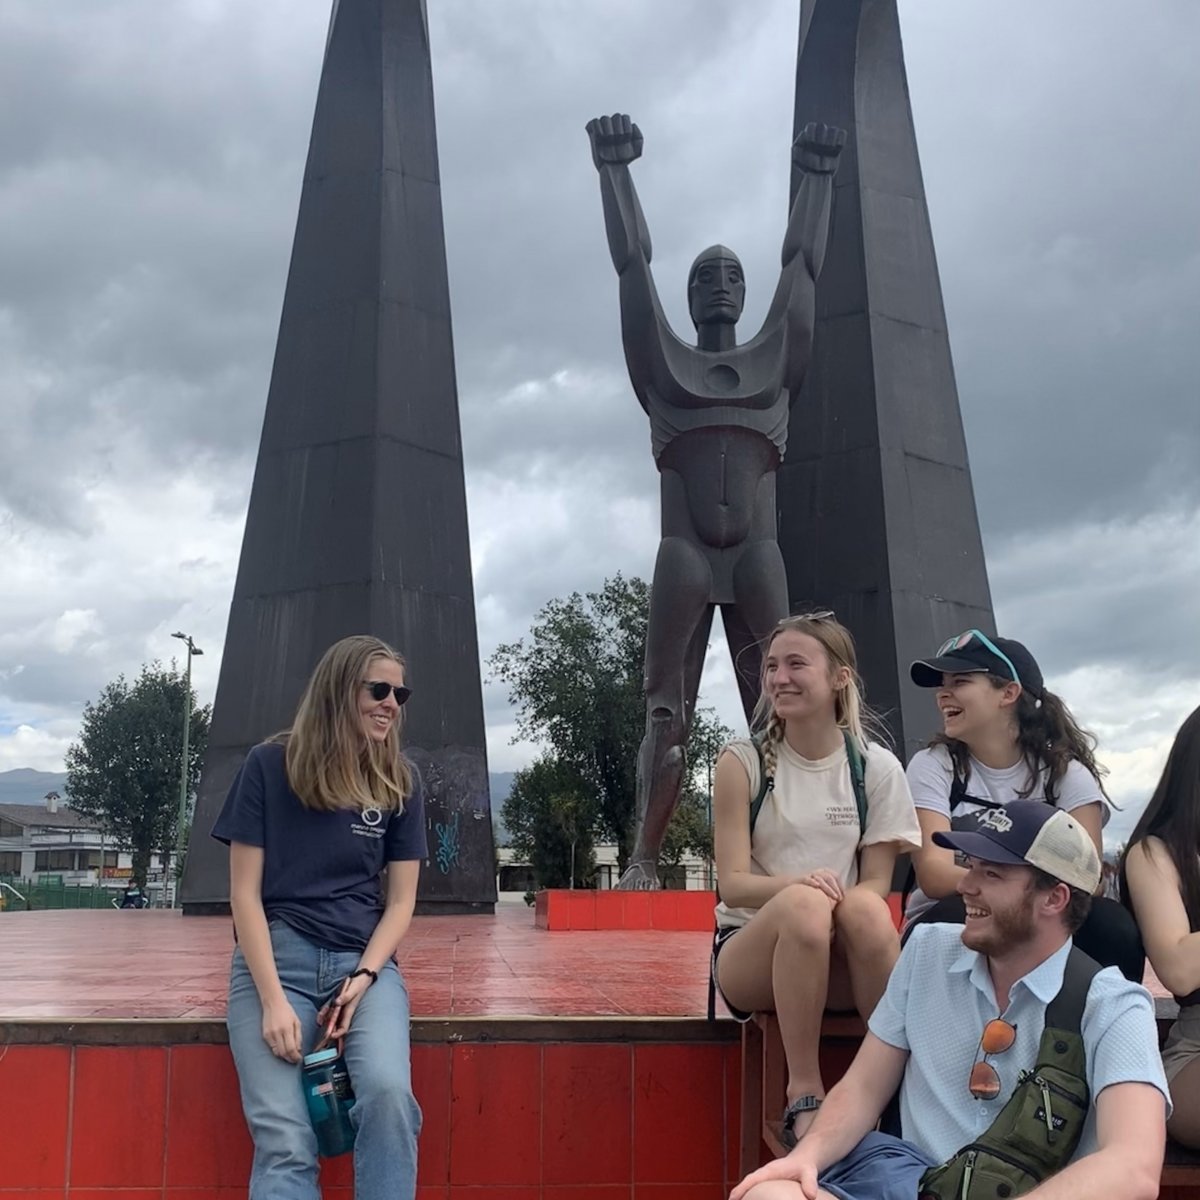 Ecuador trip participants and our site contact, Abby, take a break at a local monument